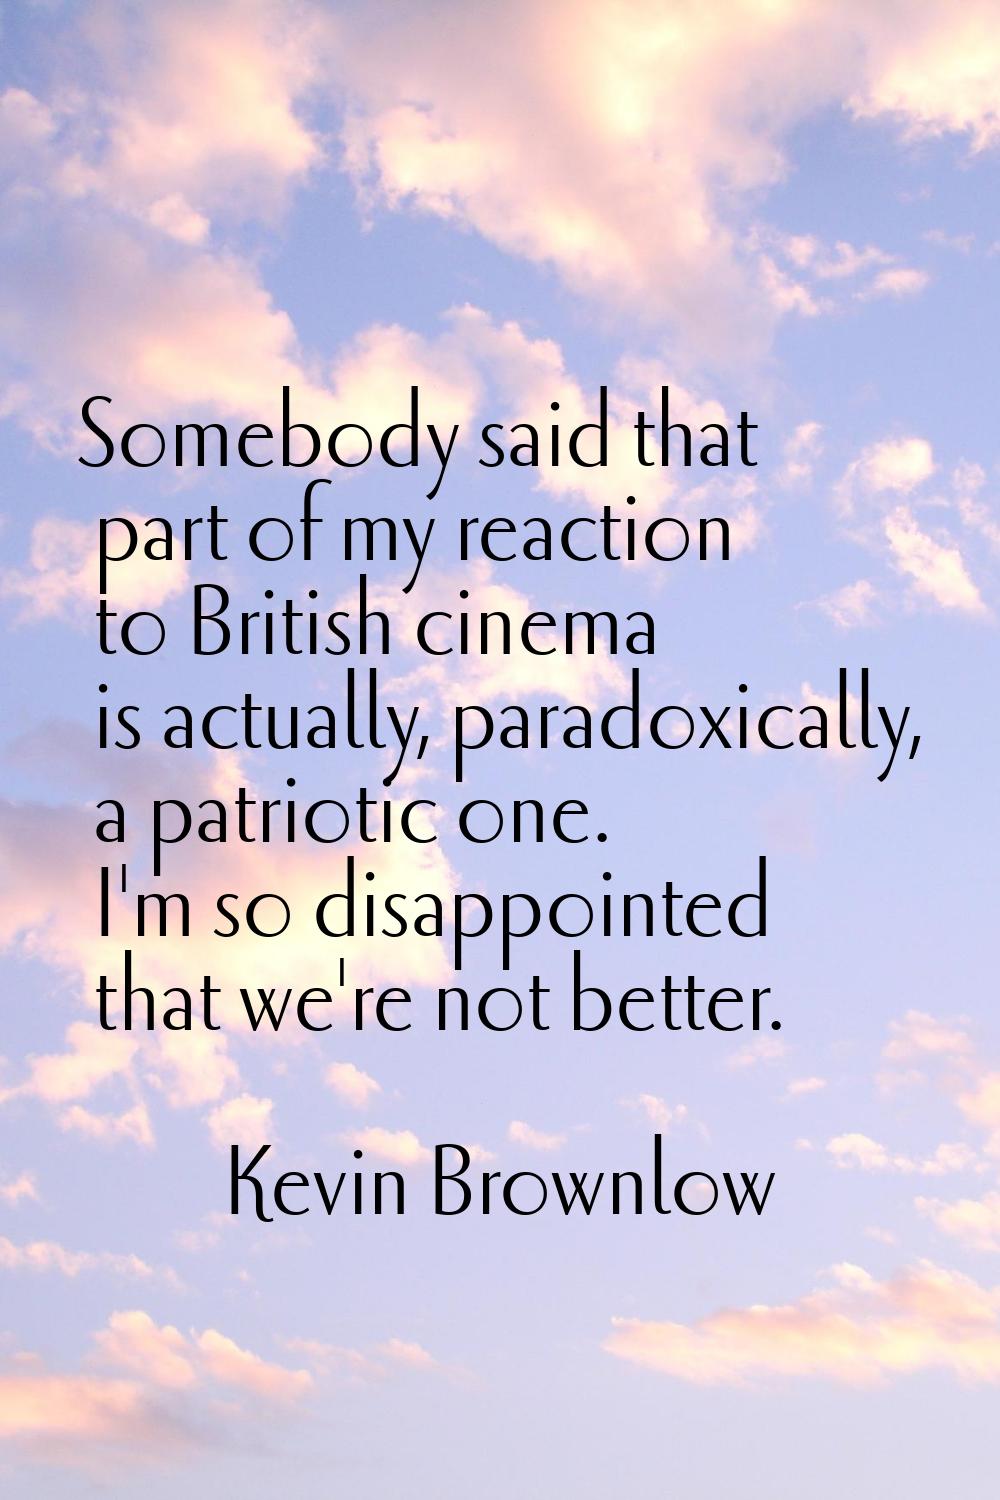 Somebody said that part of my reaction to British cinema is actually, paradoxically, a patriotic on